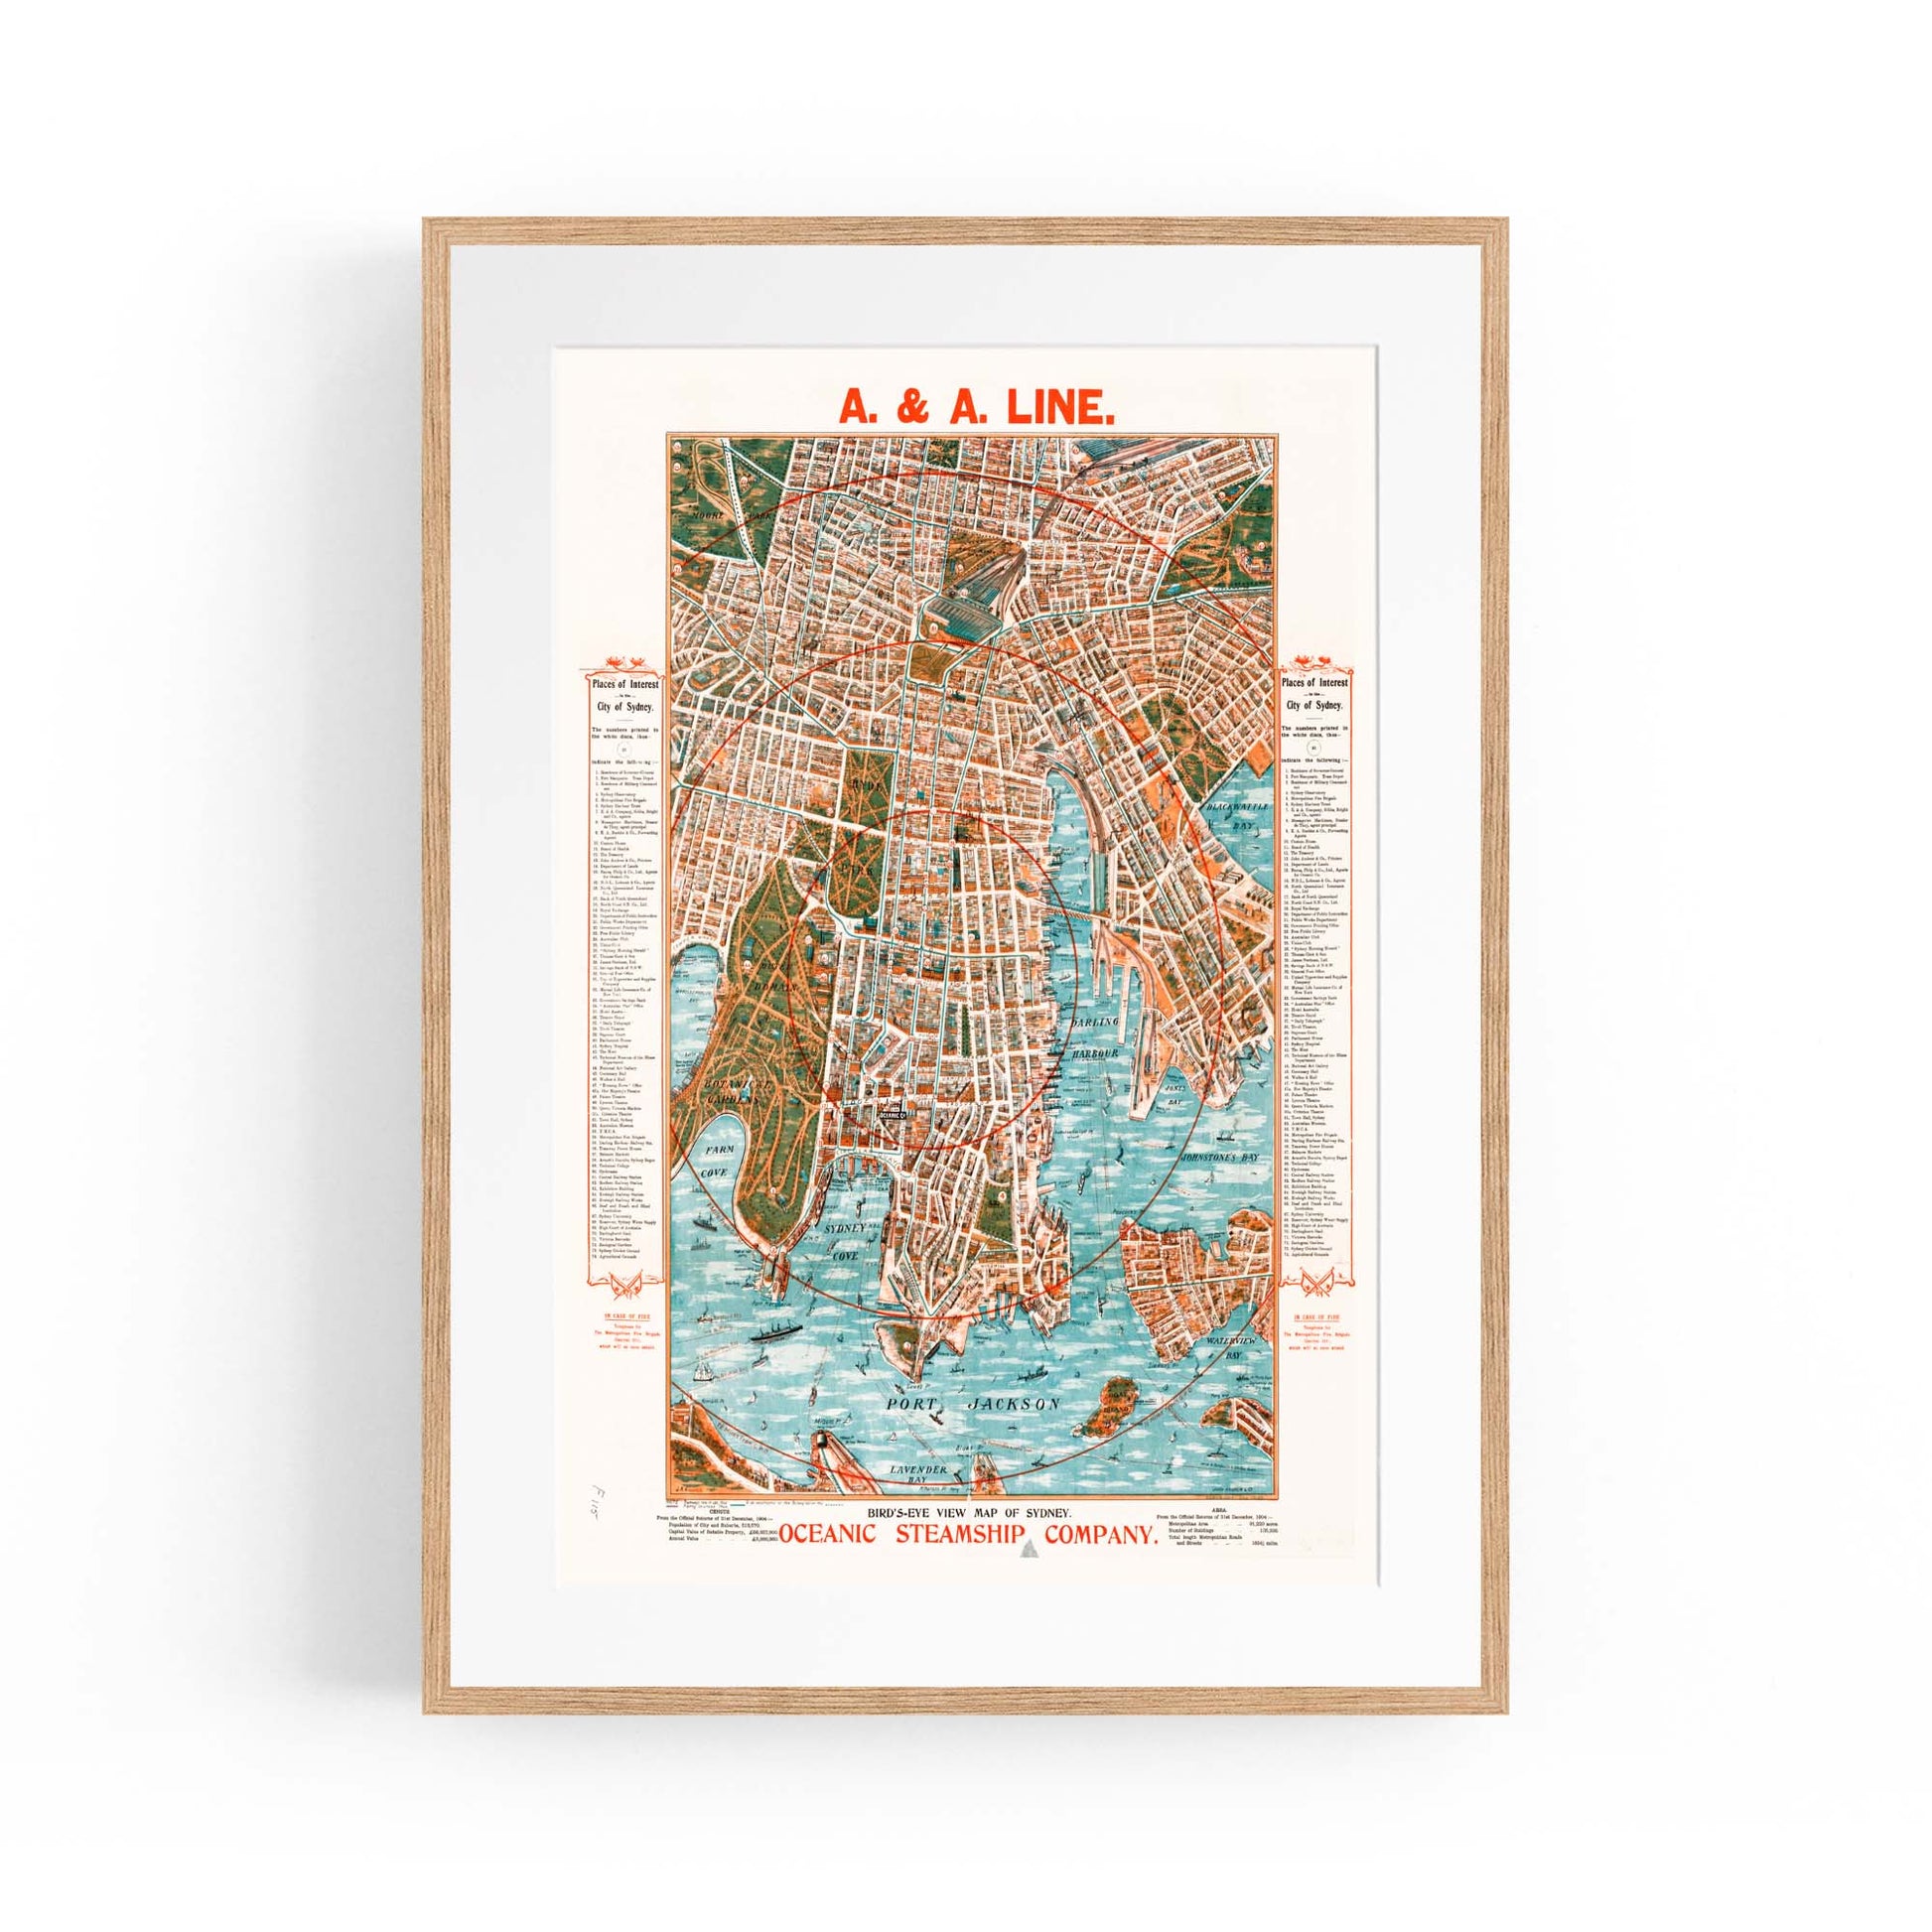 Sydney Vintage Map Australian Old Wall Art #3 - The Affordable Art Company